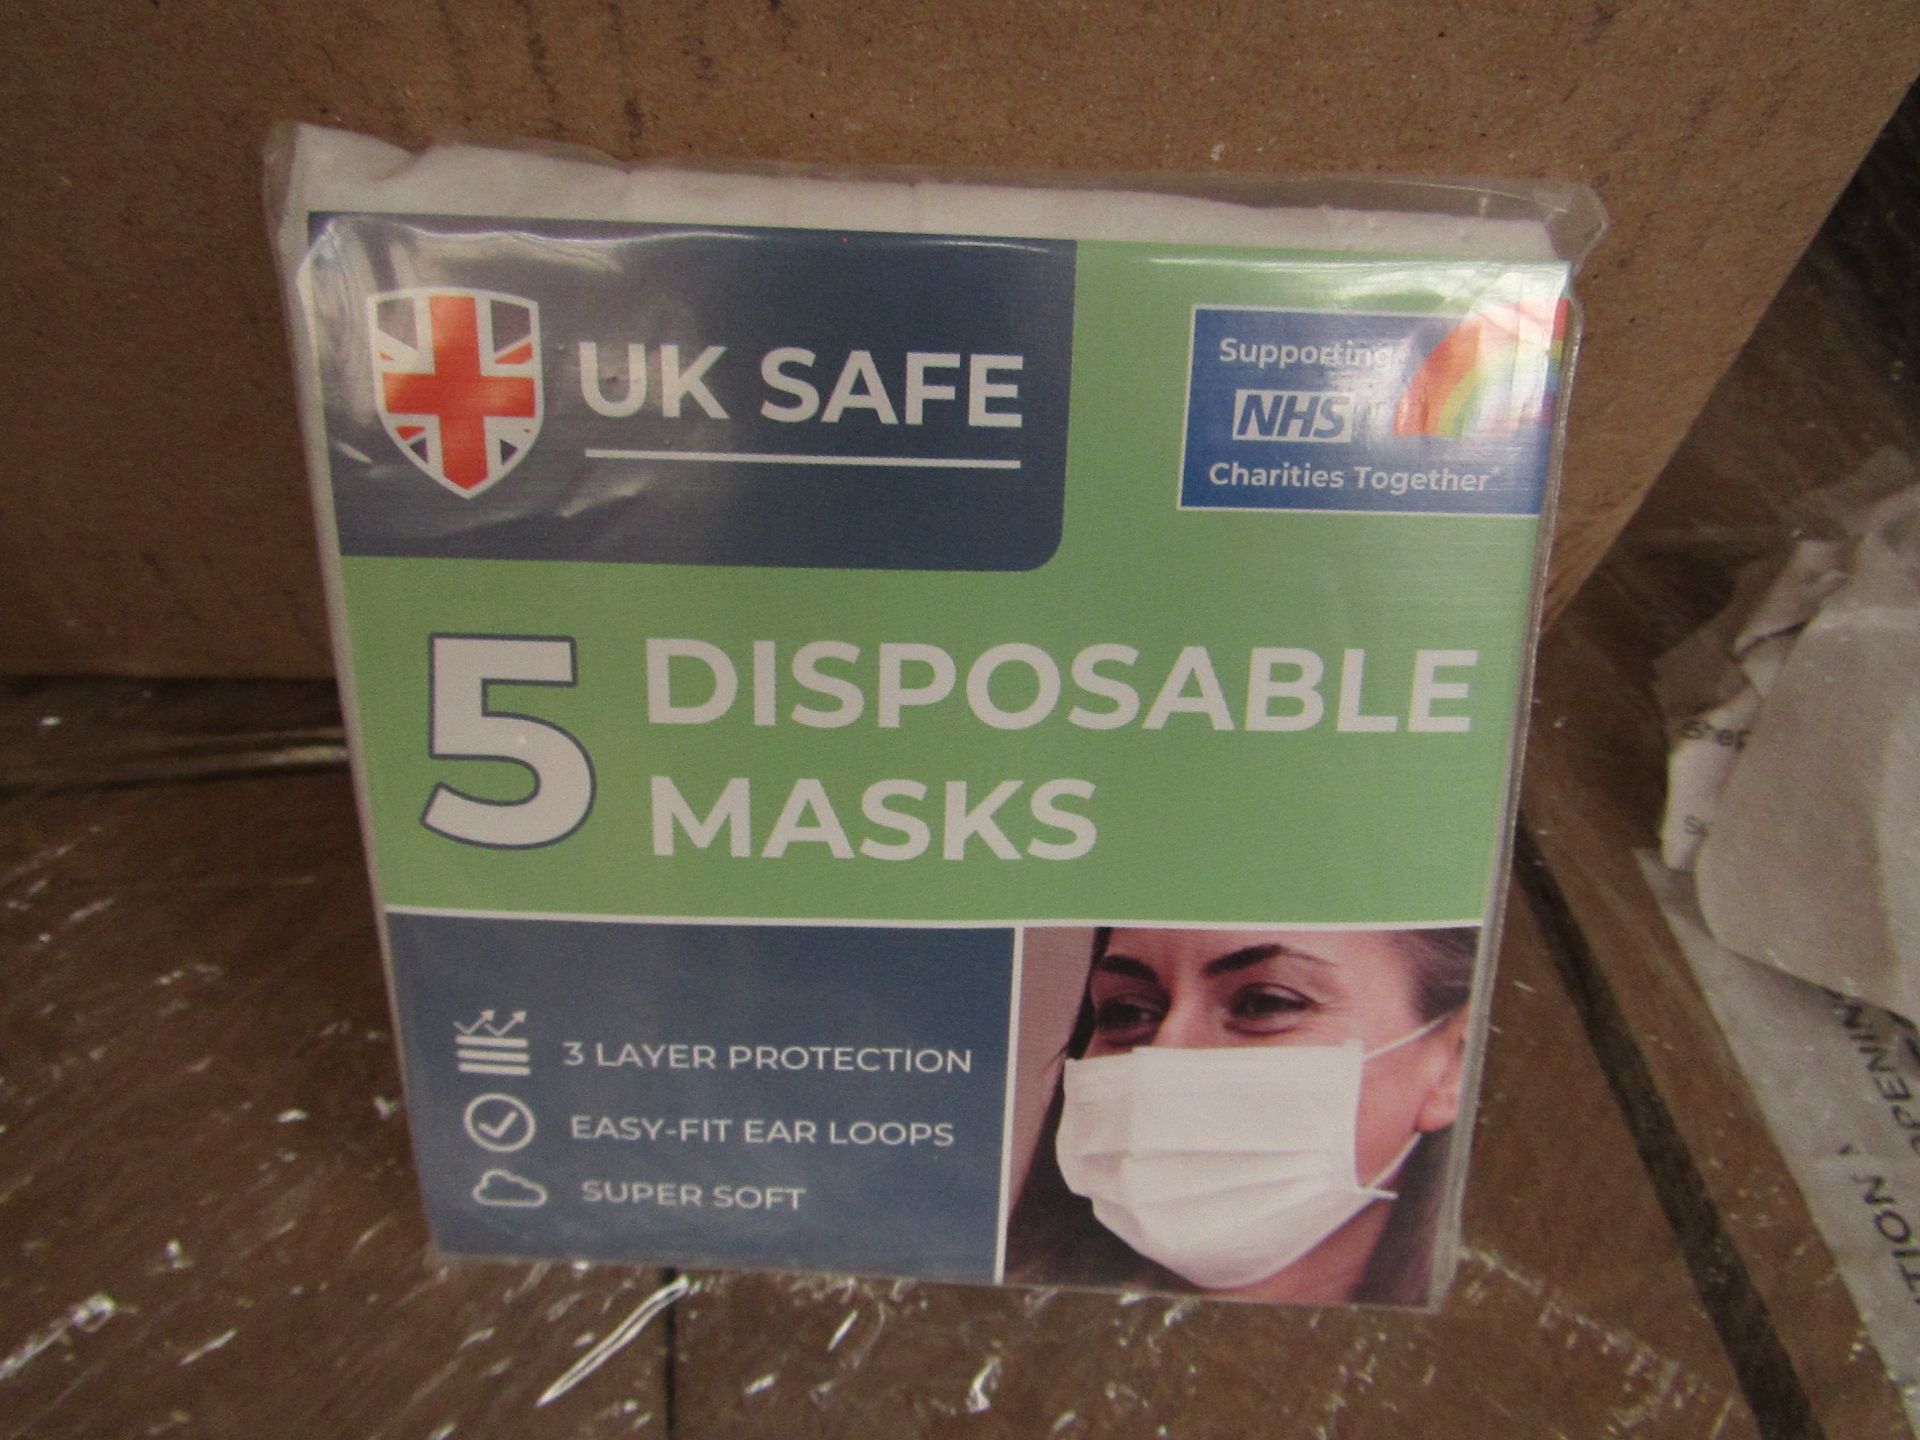 20 x Packs of 5 per pack (100 in total) Uk Safe - 3 Layer Protection Soft Easy Fit Loops